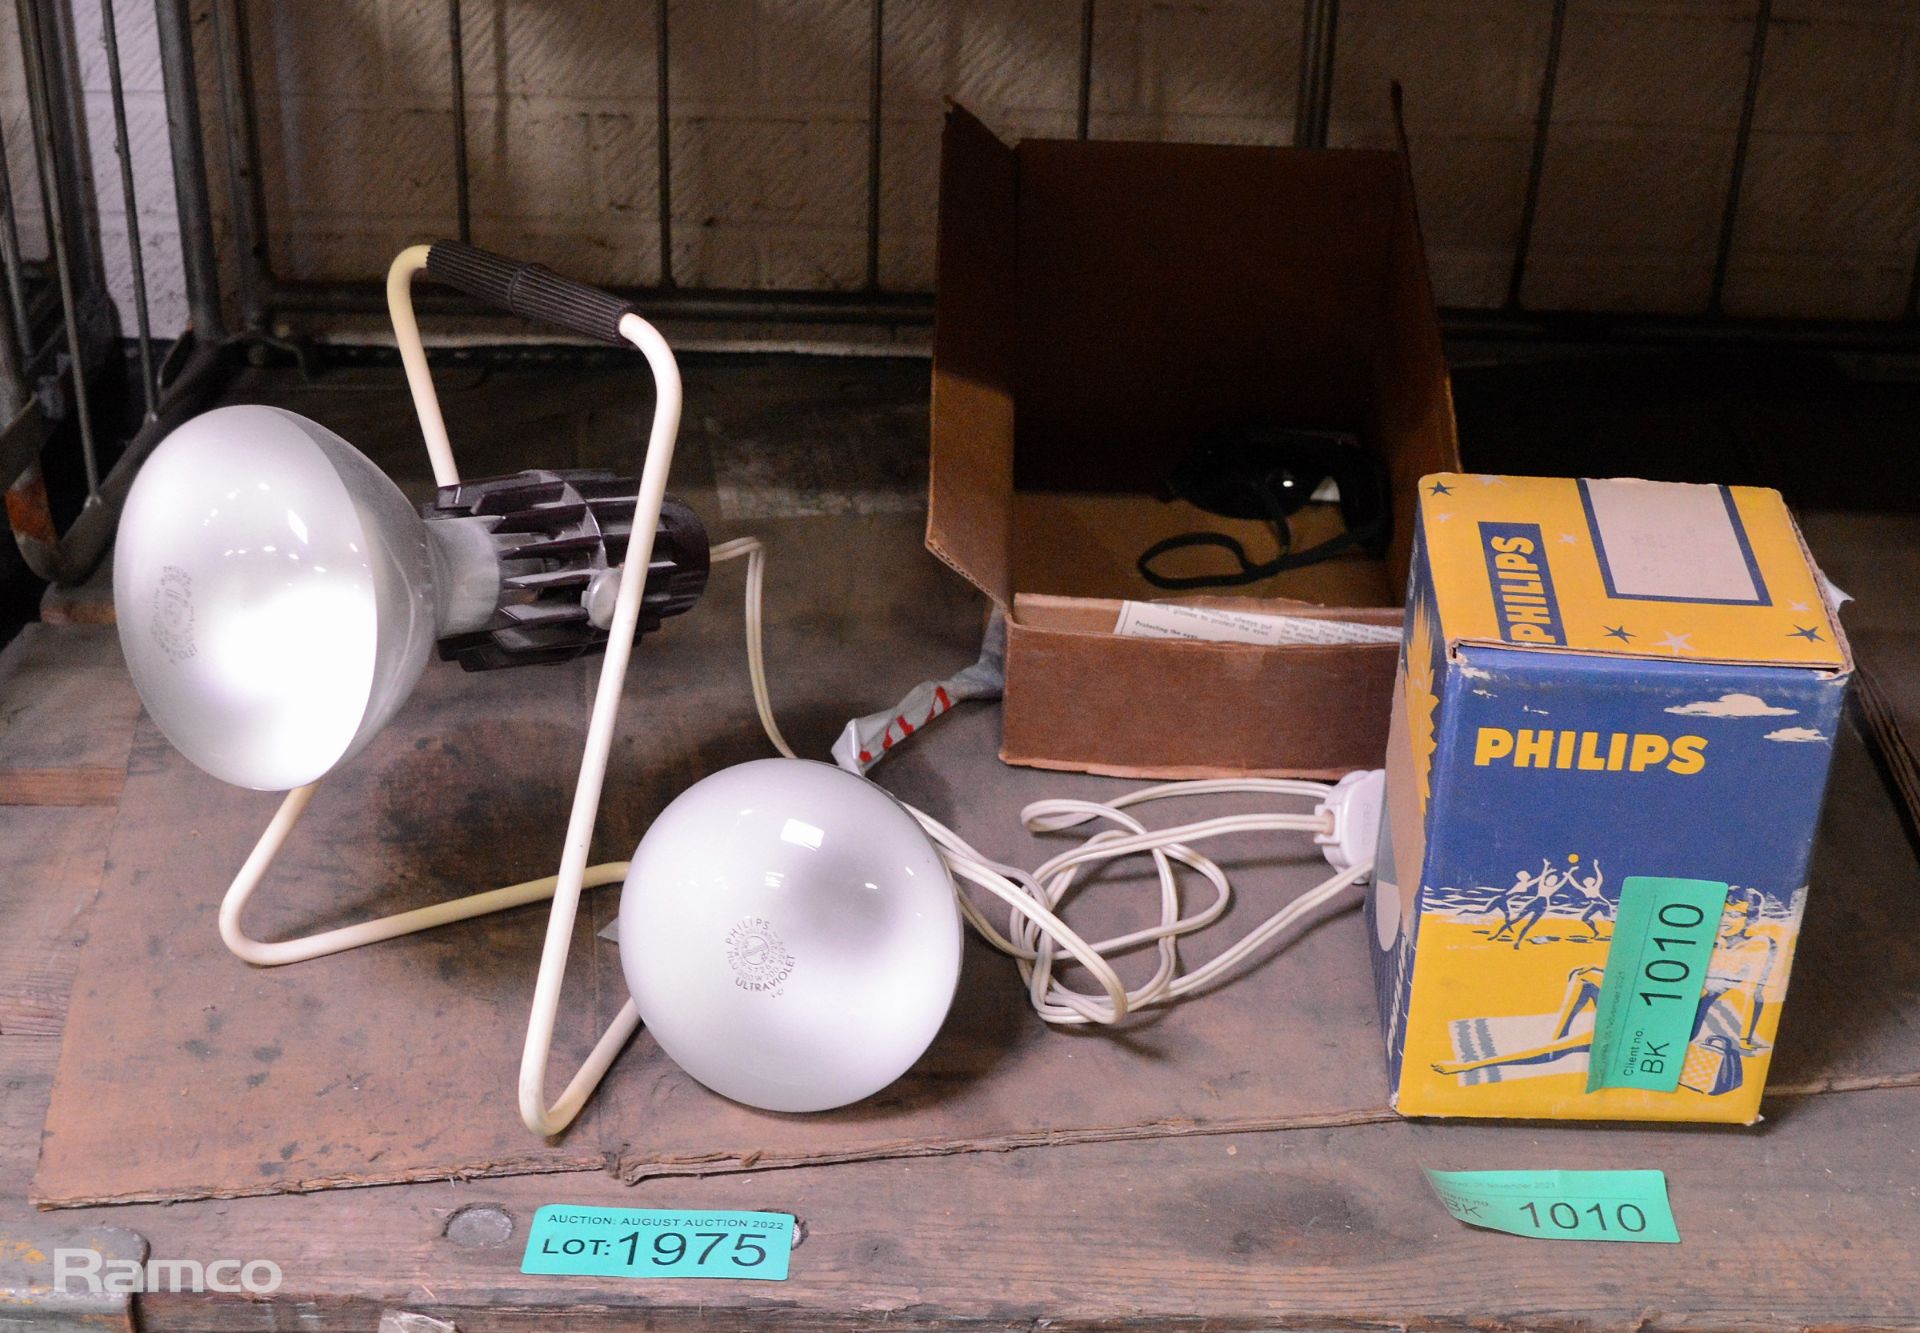 Philips lamp with ultraviolet lamps